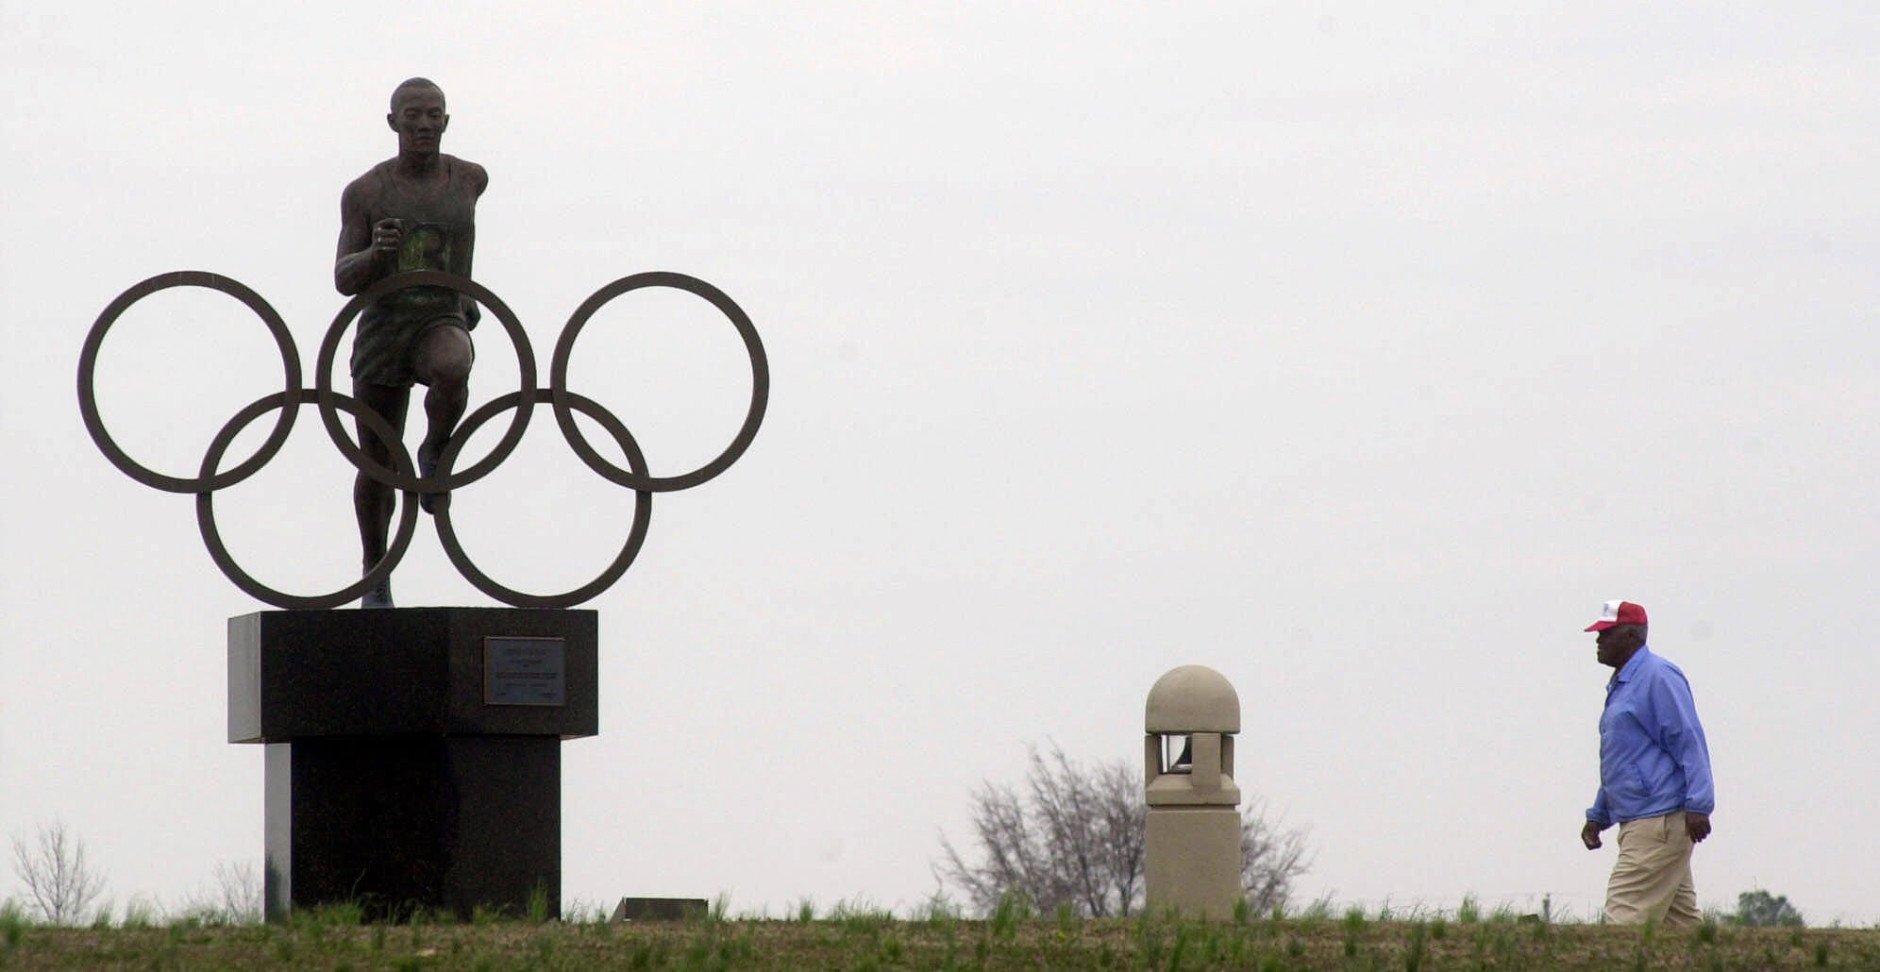 The Jesse Owens Memorial Park in Oakville, Ala. is seen here. (AP Photo/Dave Martin)